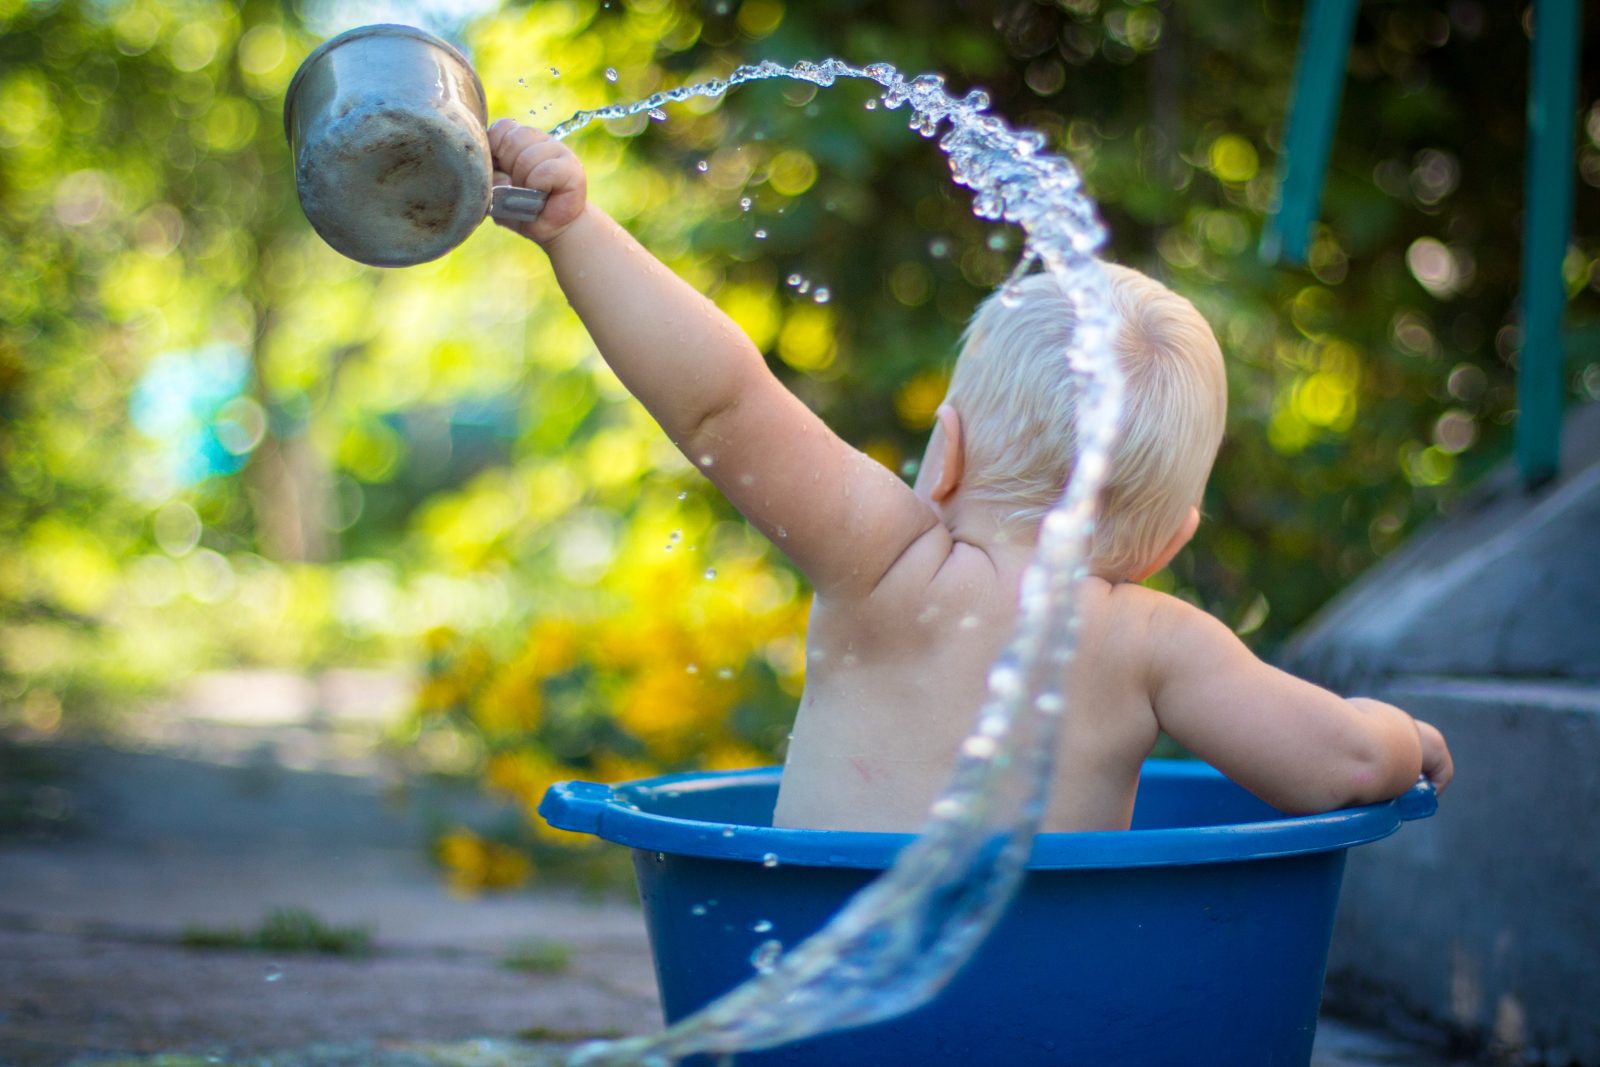 A child bathed in a blue basin of water